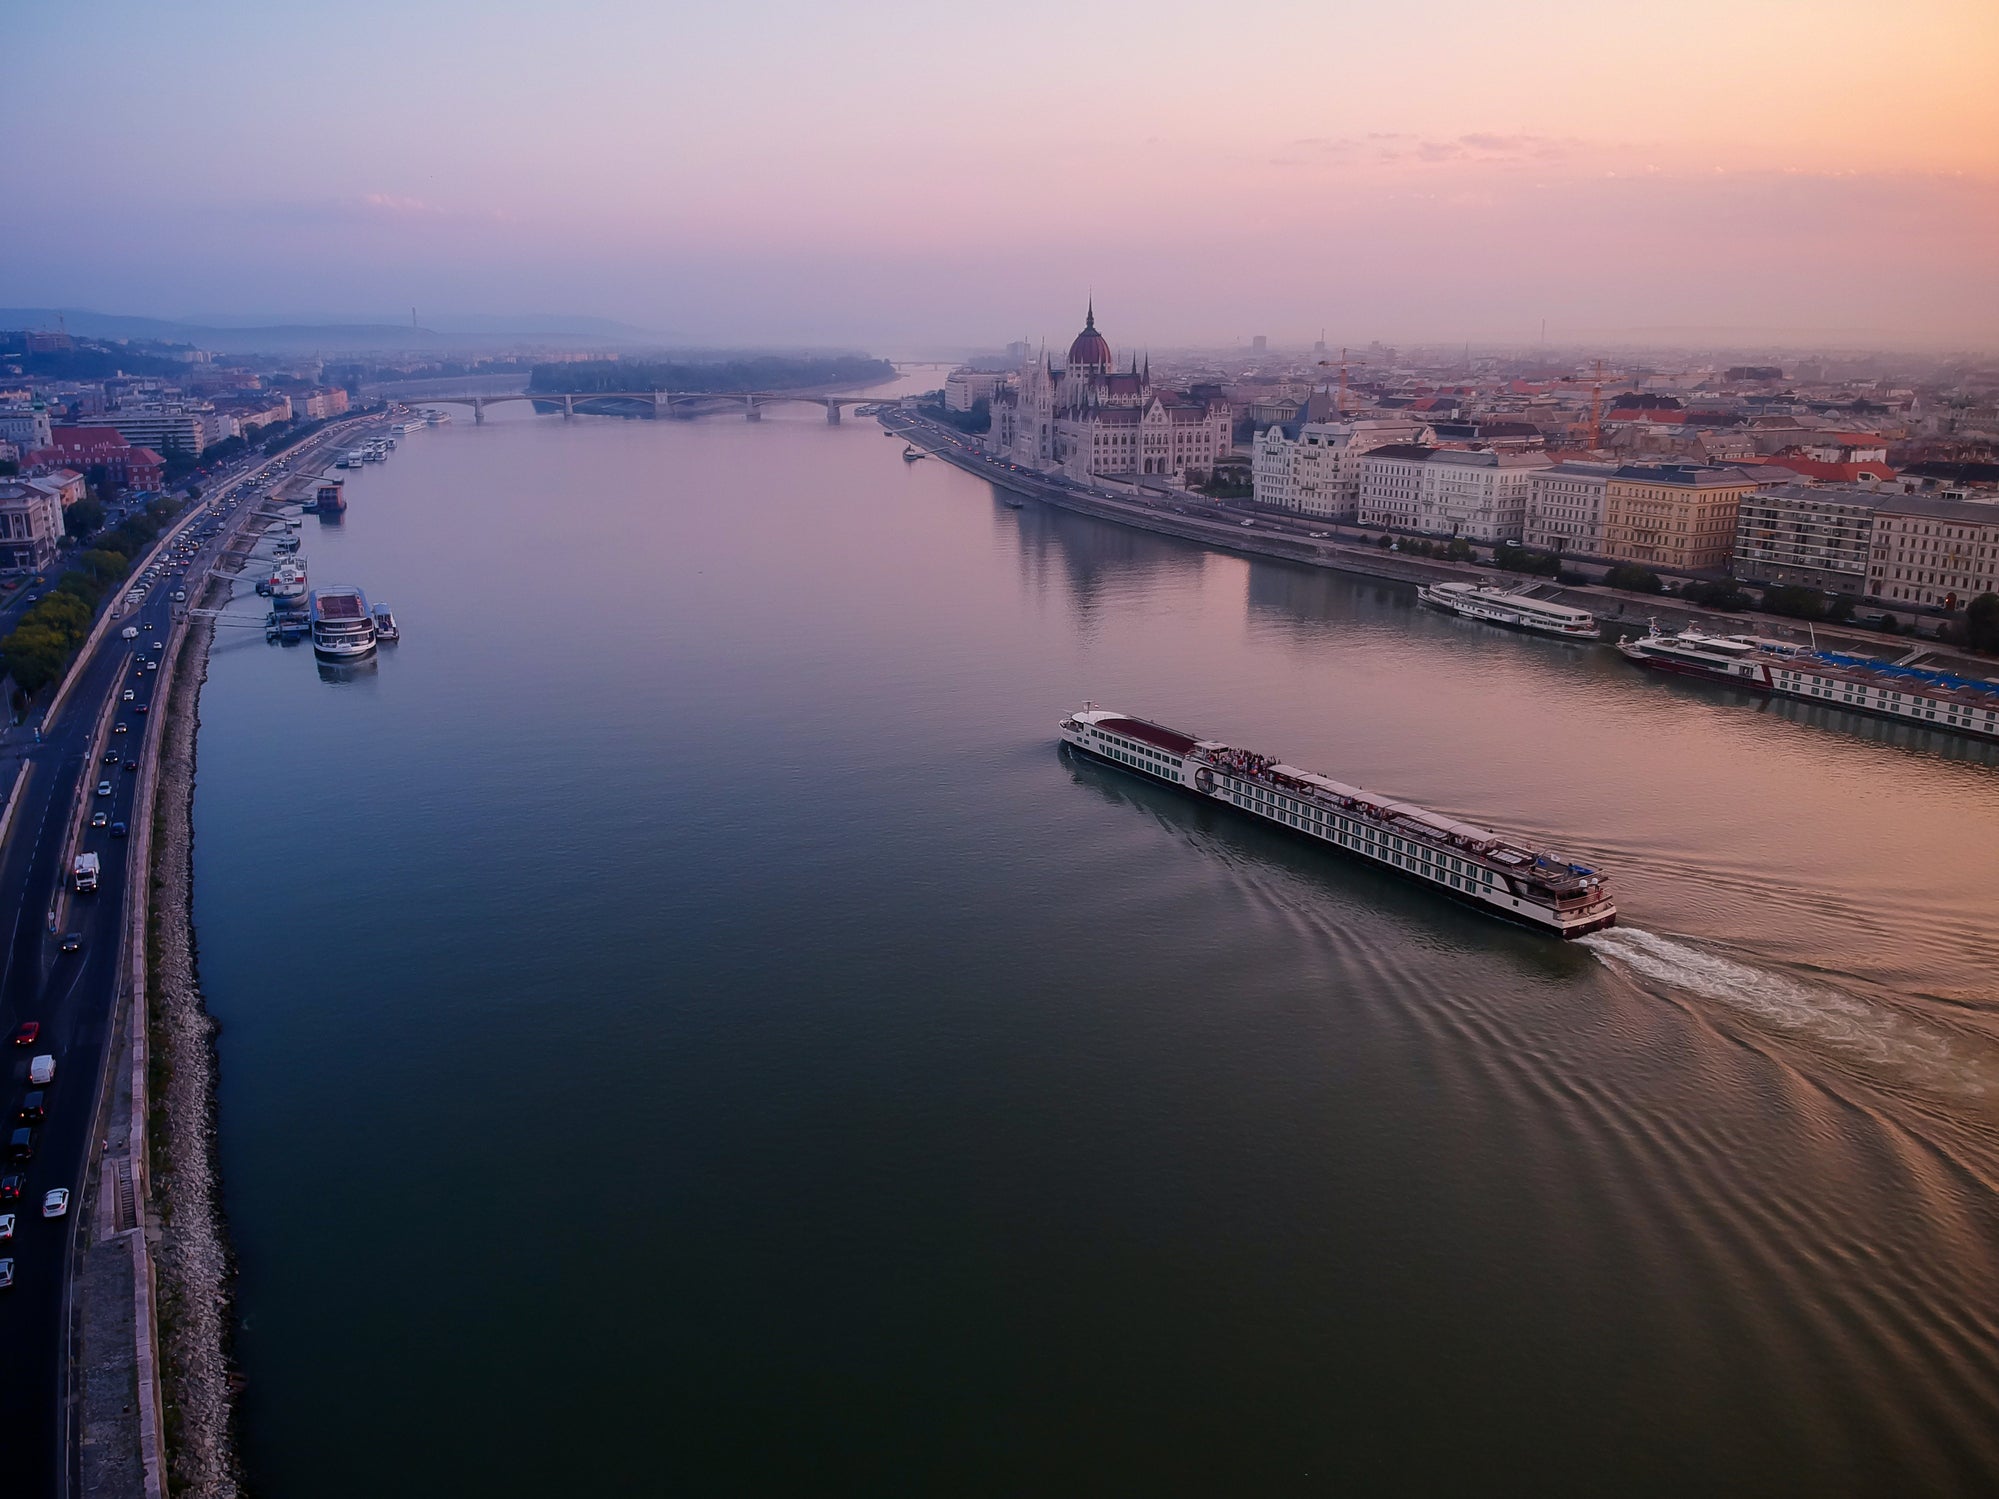 Calm Danube river in an early morning